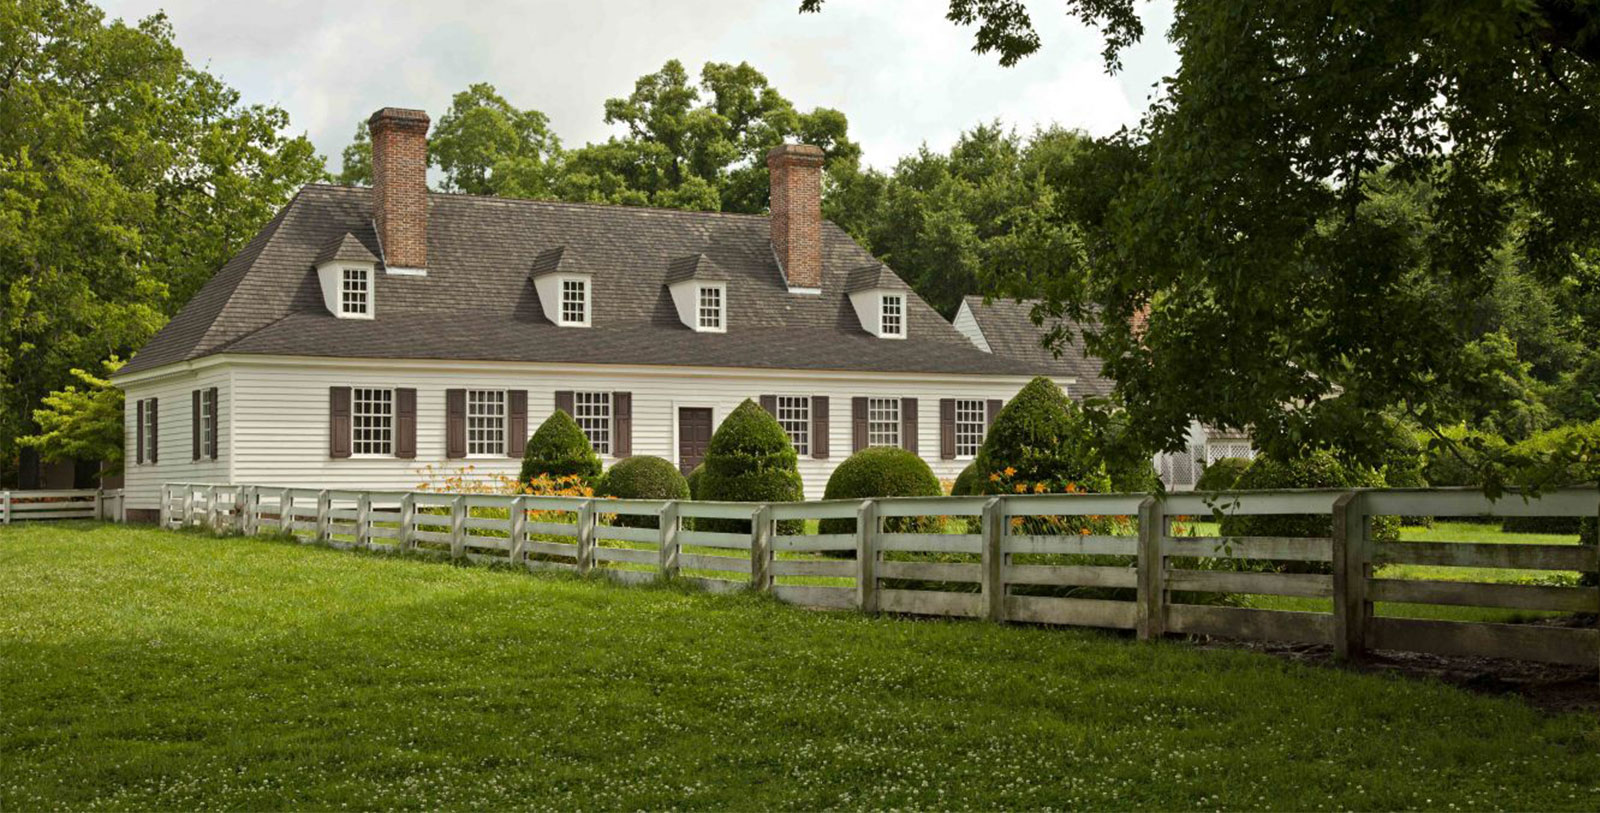 Explore pastoral beauty by strolling through Great Hopes Plantation.